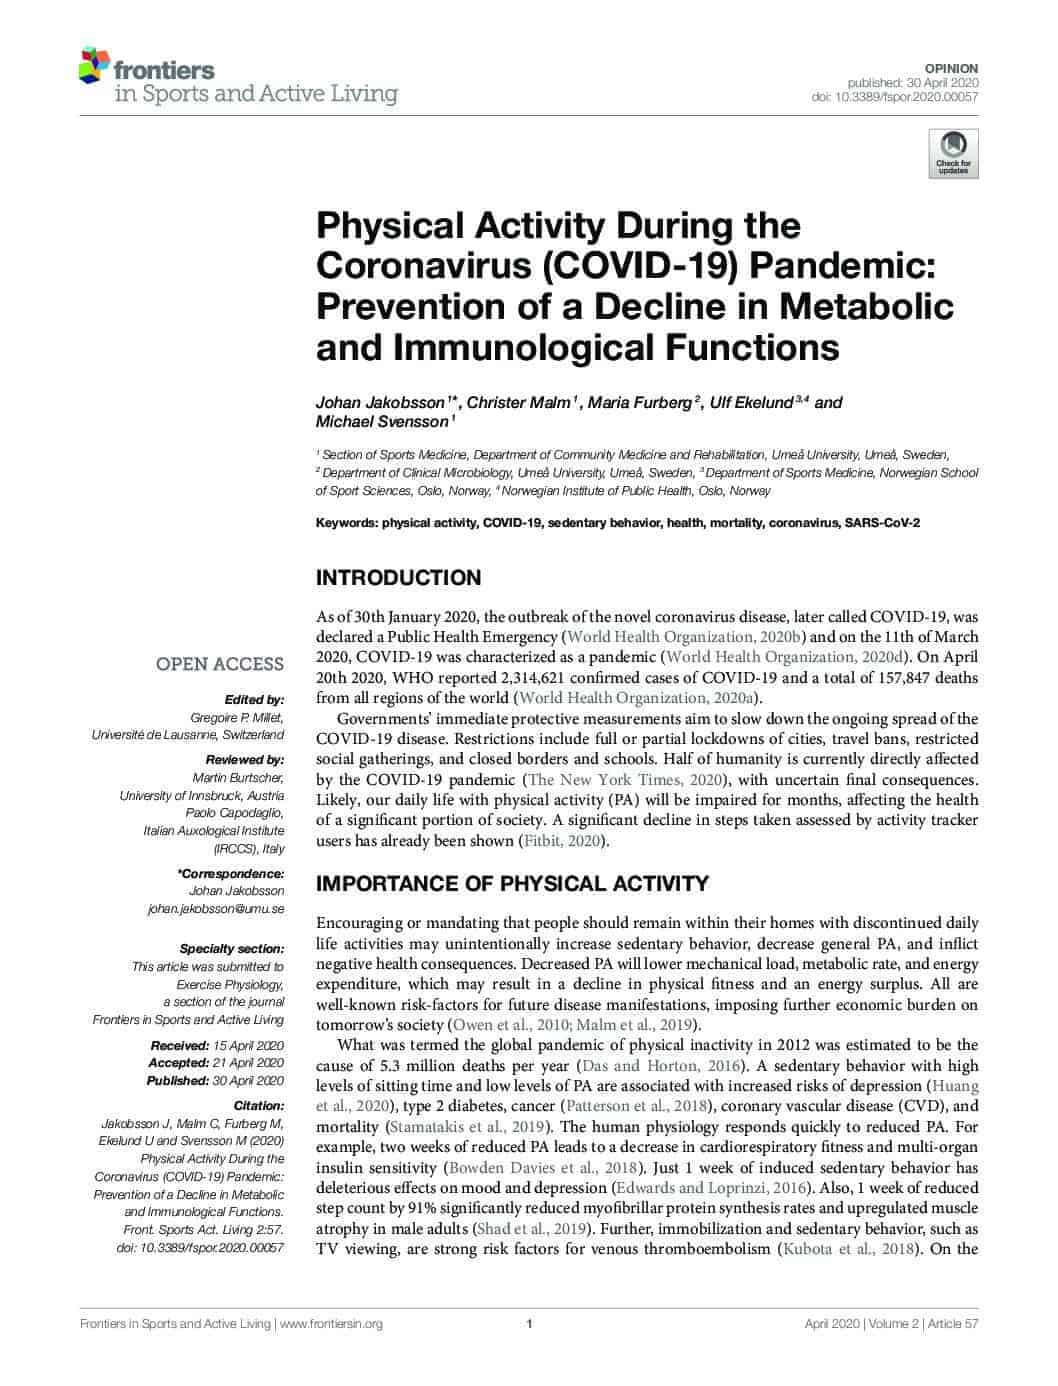 Physical Activity During the Coronavirus (COVID-19) Pandemic: Prevention of a Decline in Metabolic and Immunological Functions